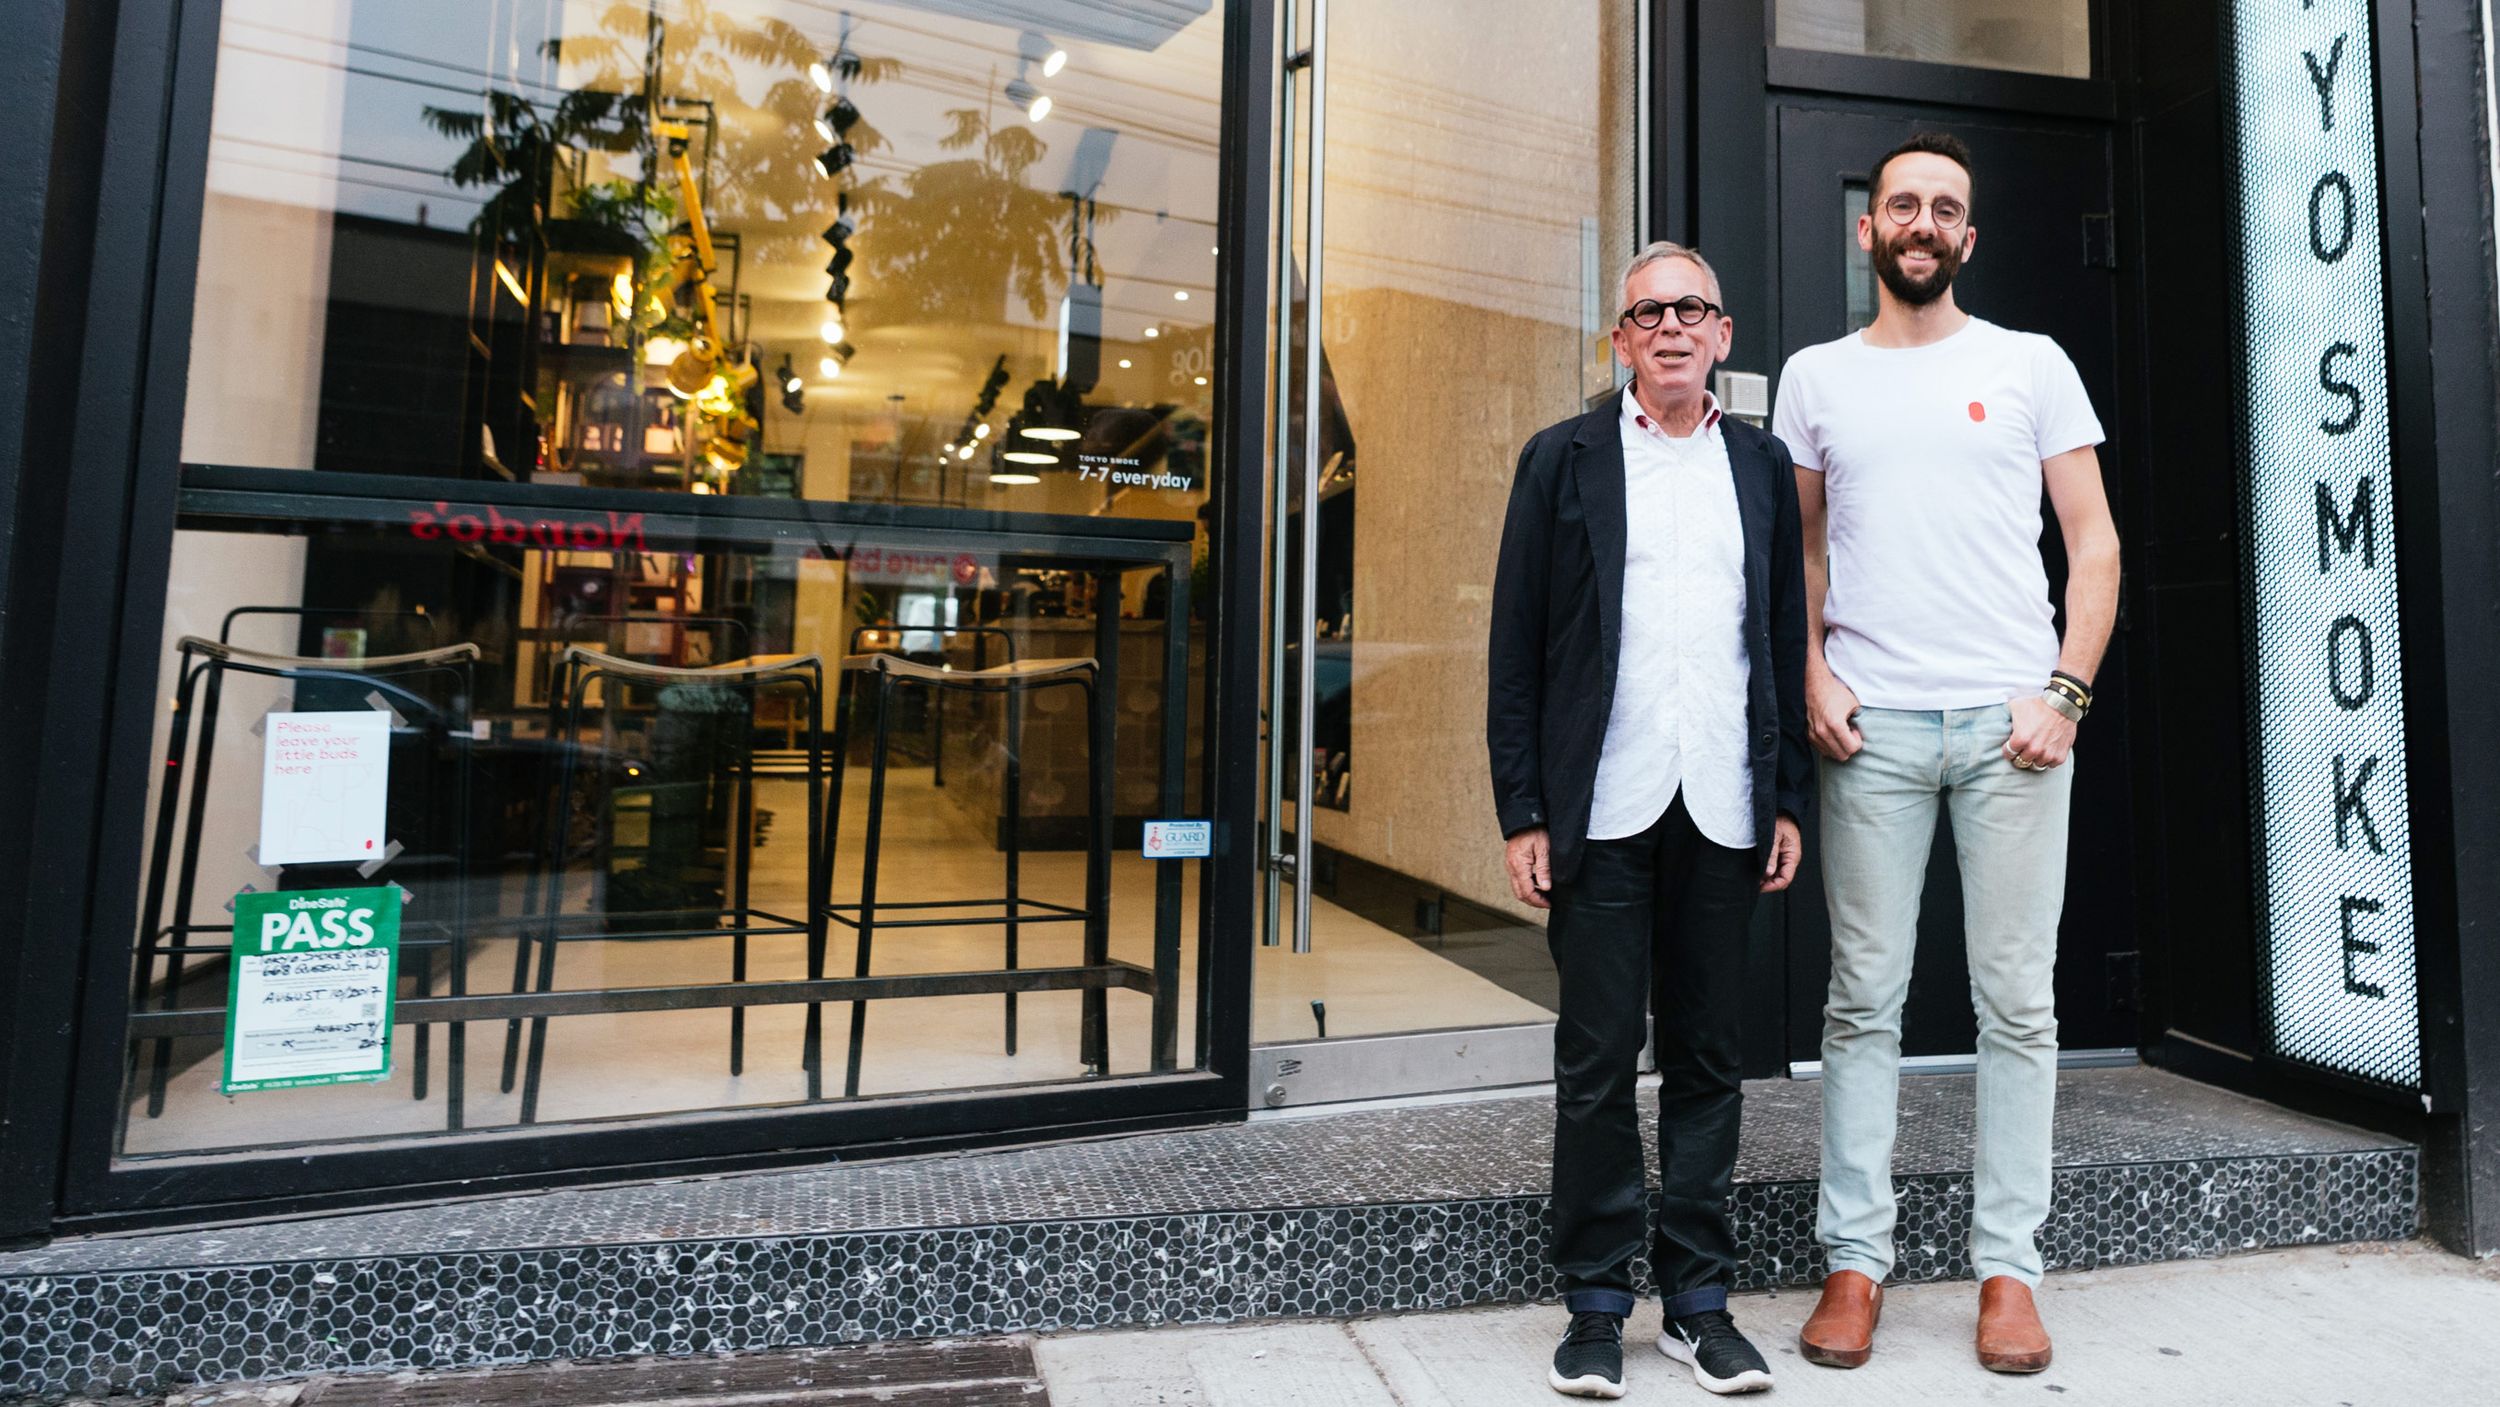 A Father-Son Duo Created the Starbucks of Cannabis